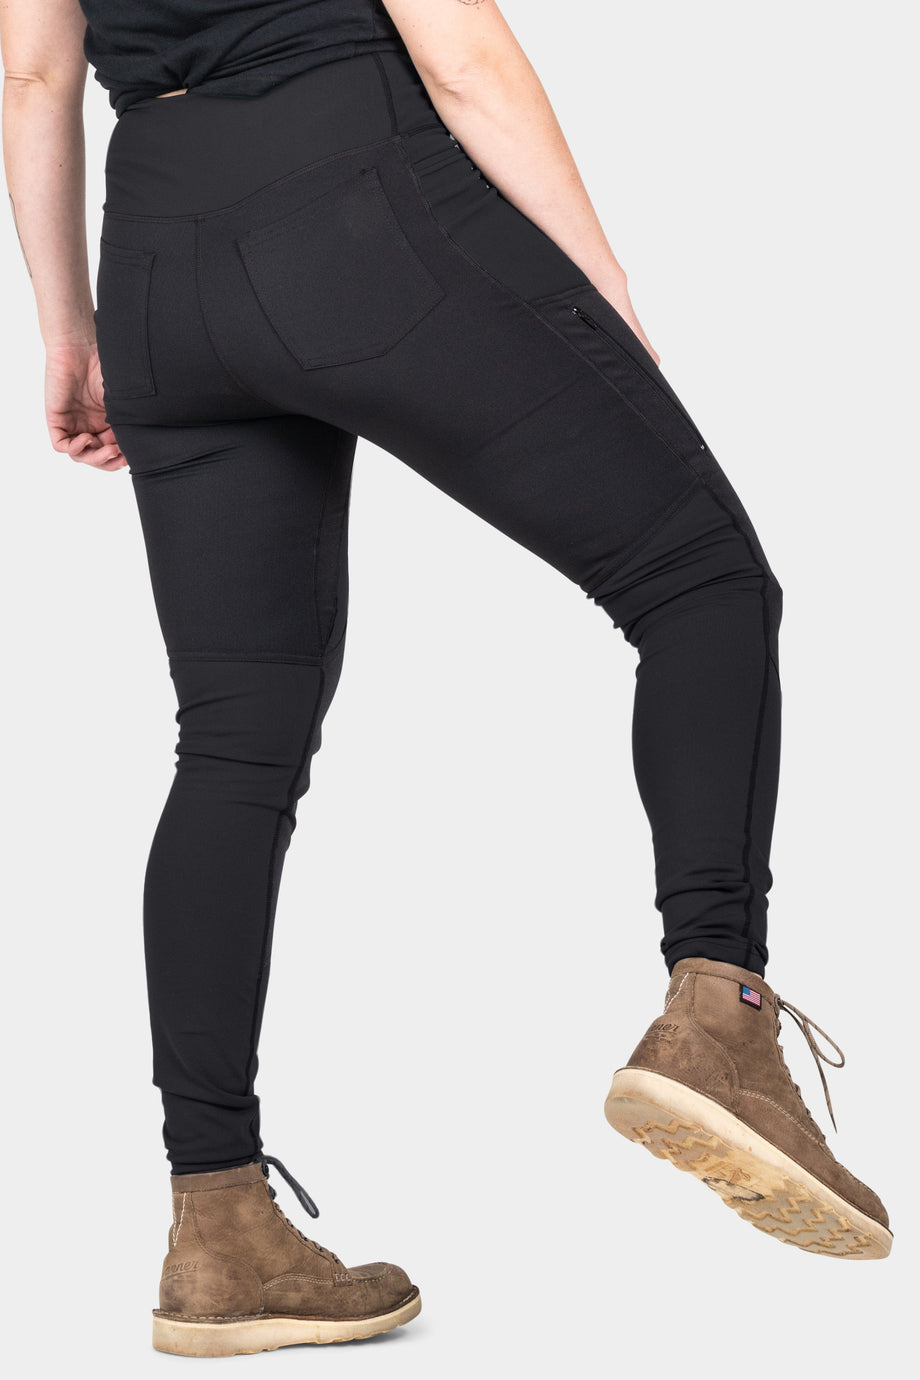 Women's Crossover Leggings with Pockets – Mallet and Field